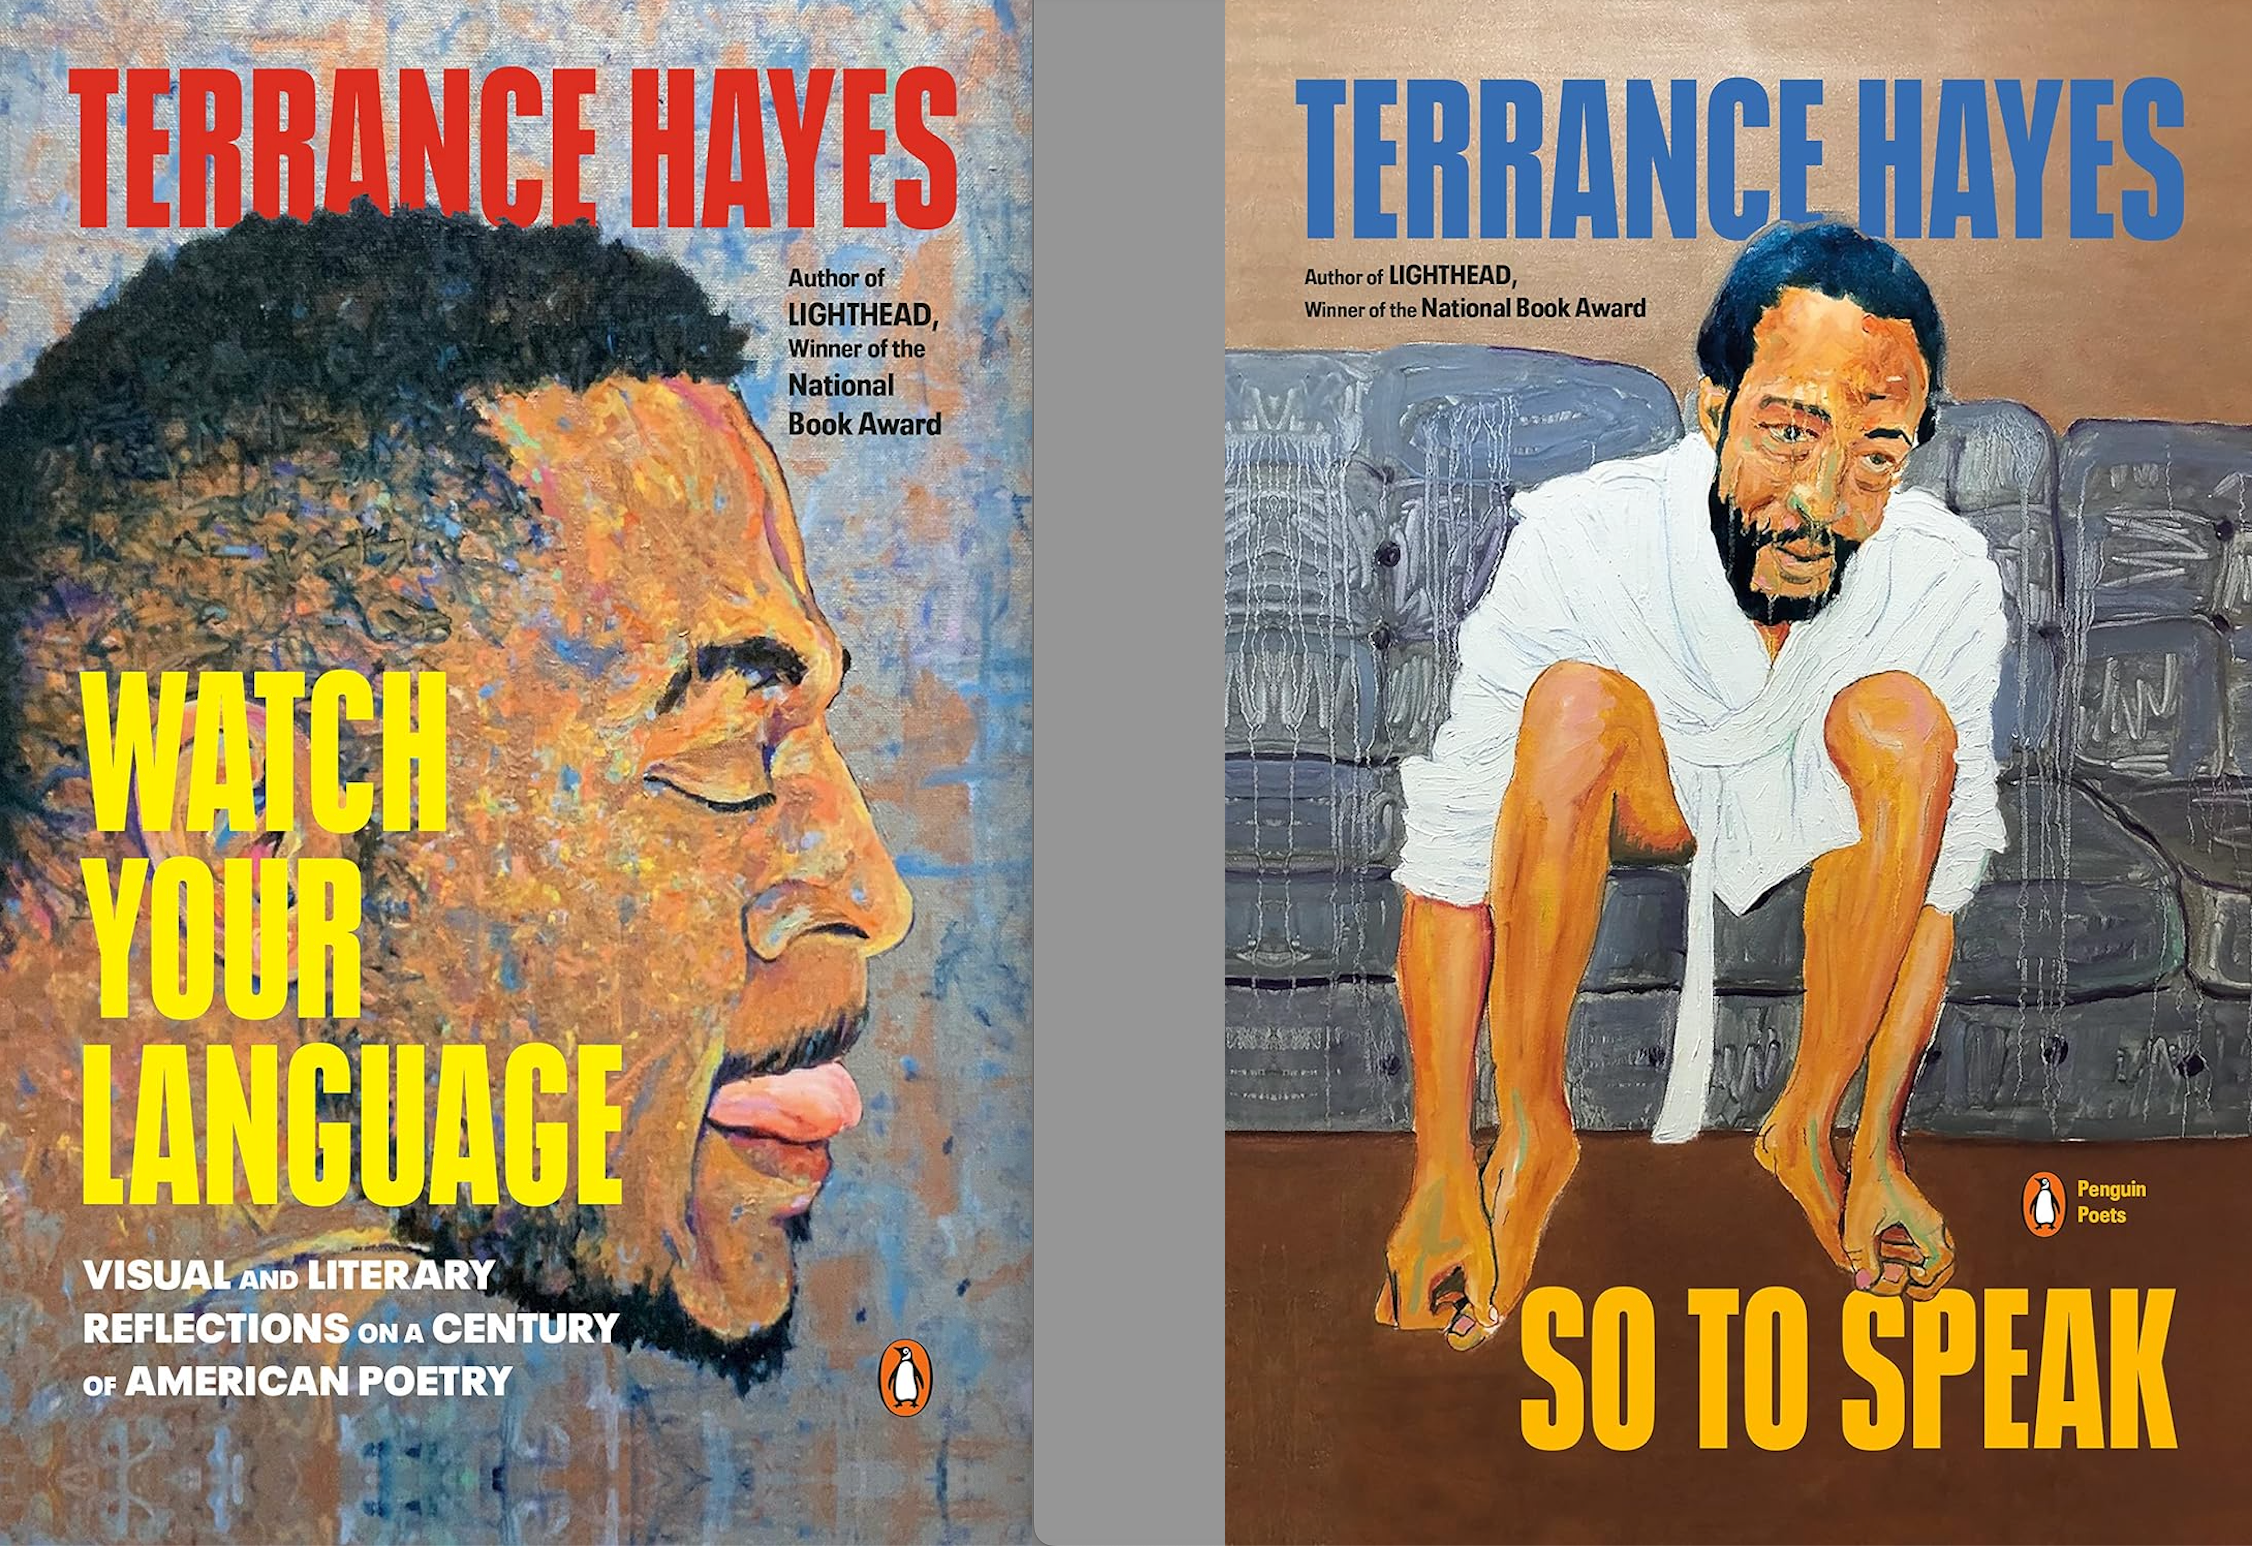 Vehicles of Awareness: On Terrance Hayes’s “So to Speak” and “Watch Your Language”